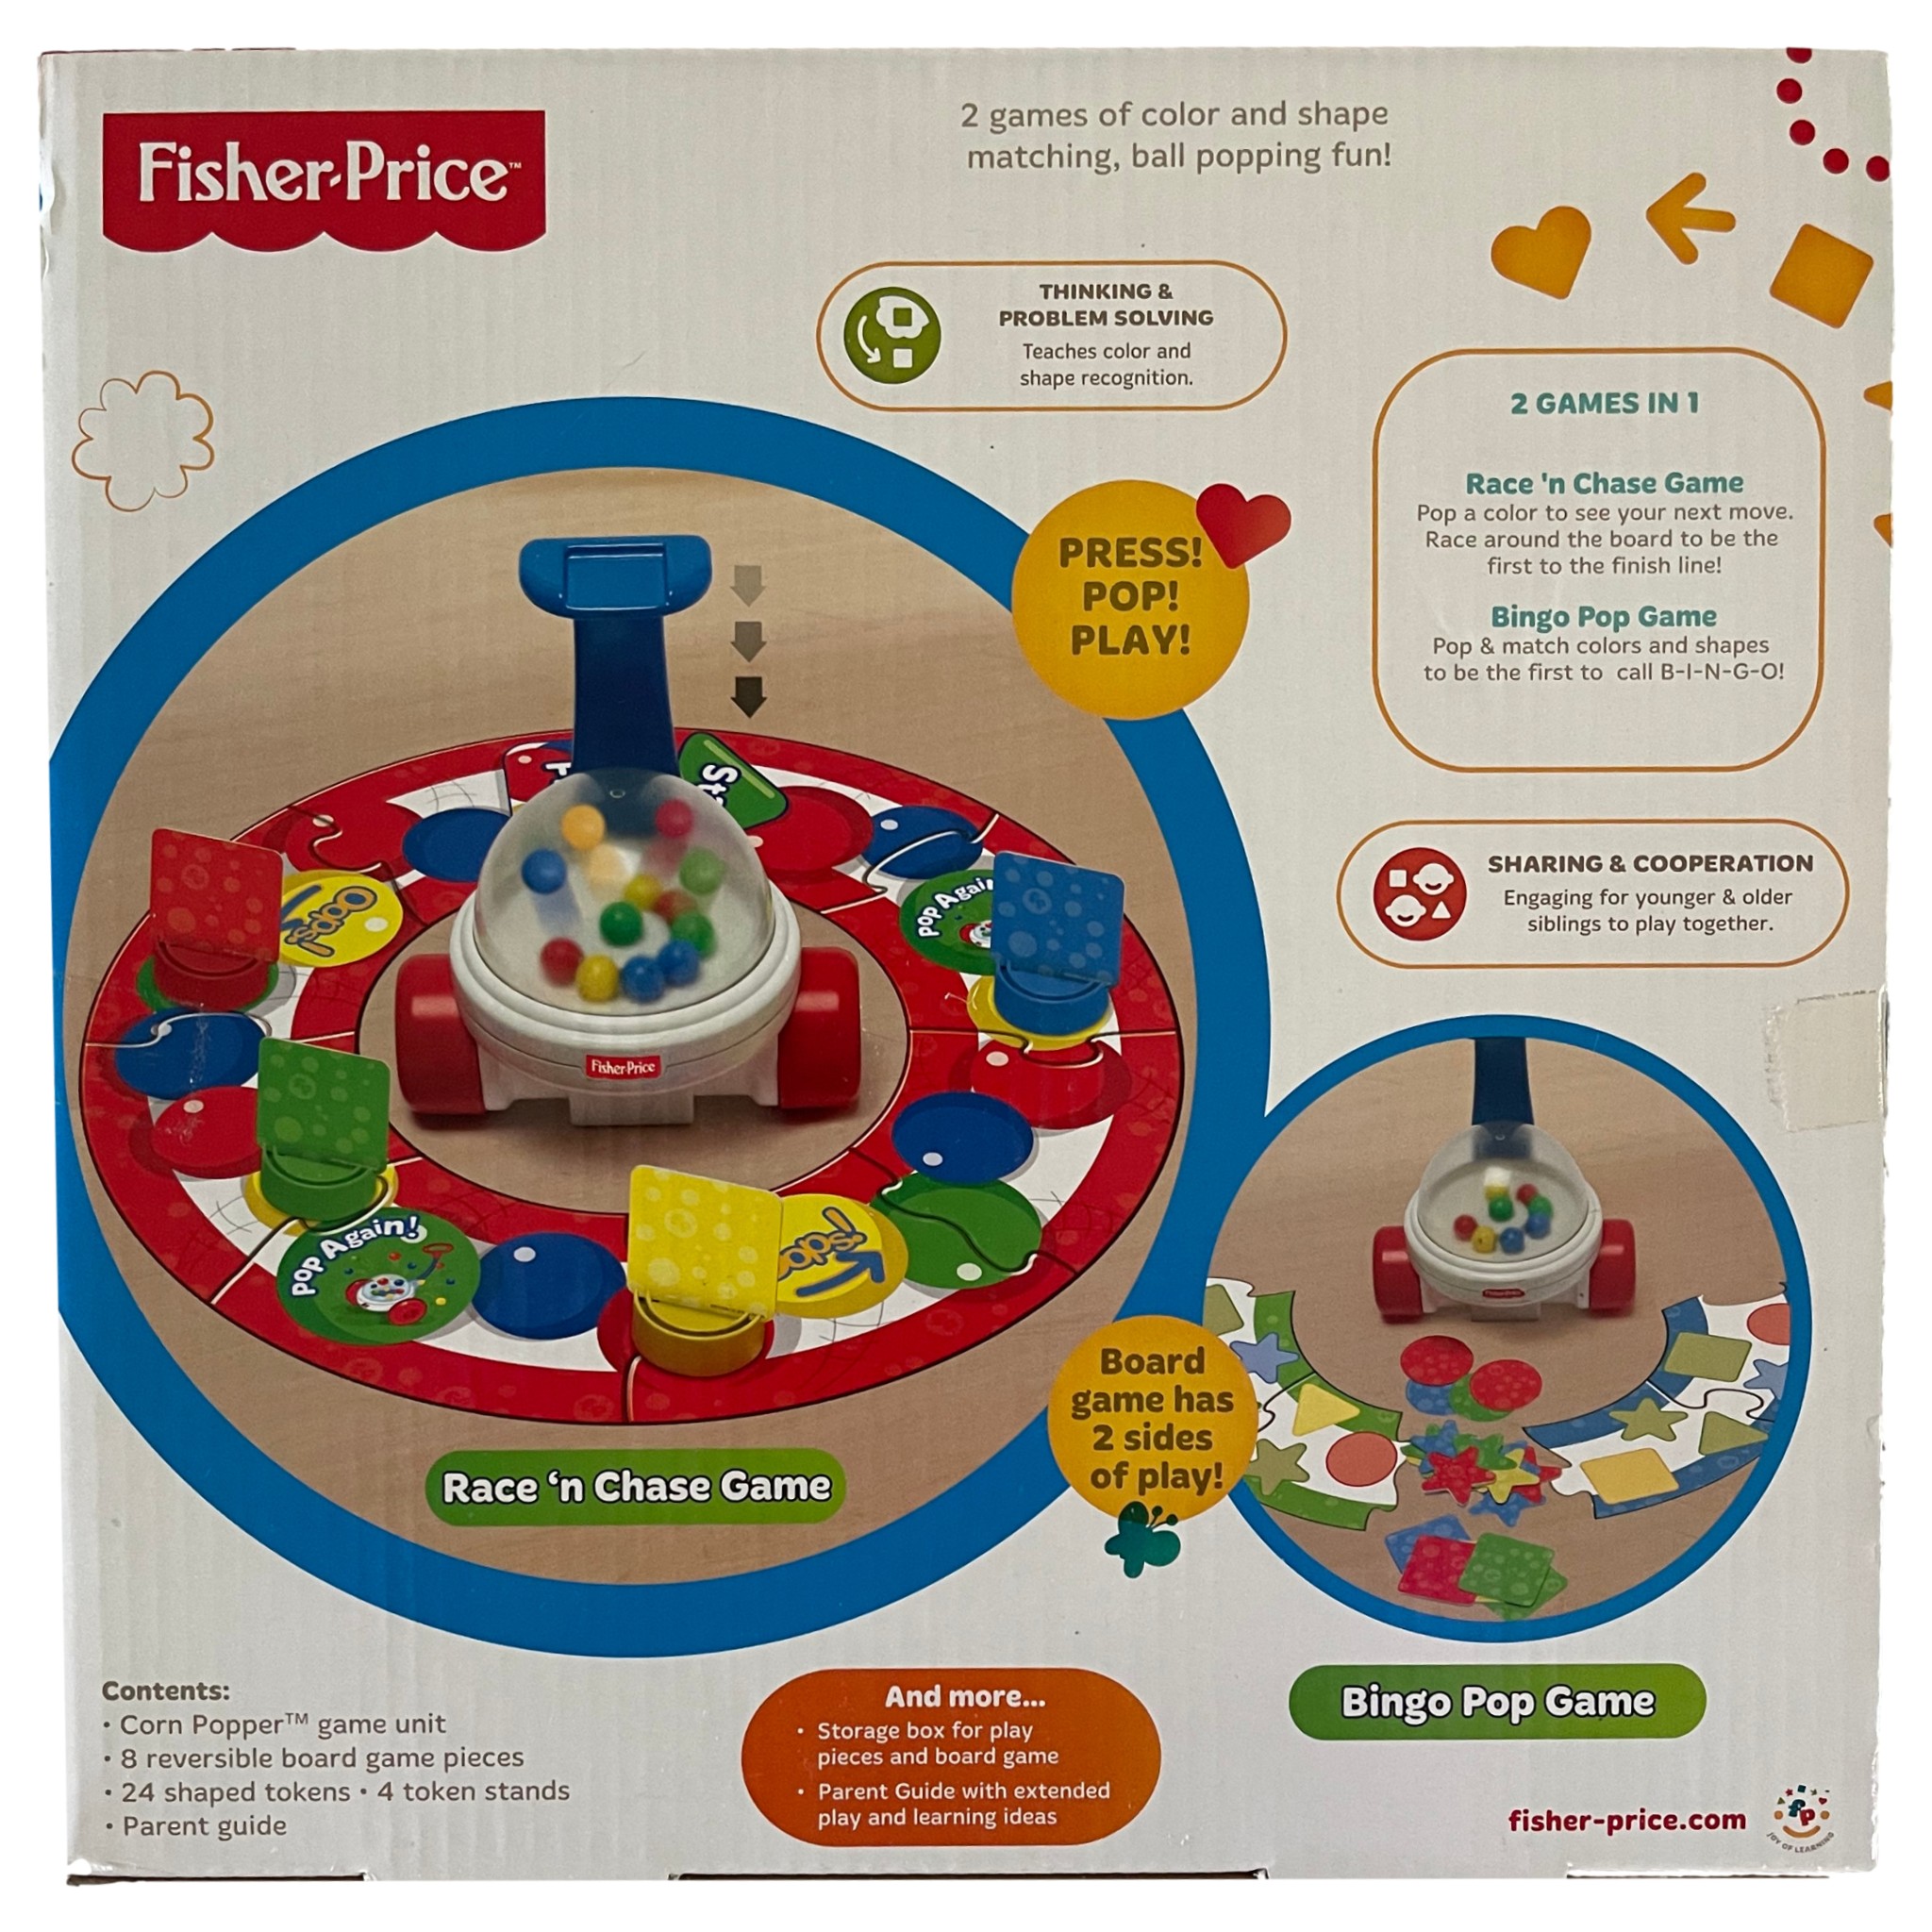 Fisher-Price Corn Popper Game - My First Game